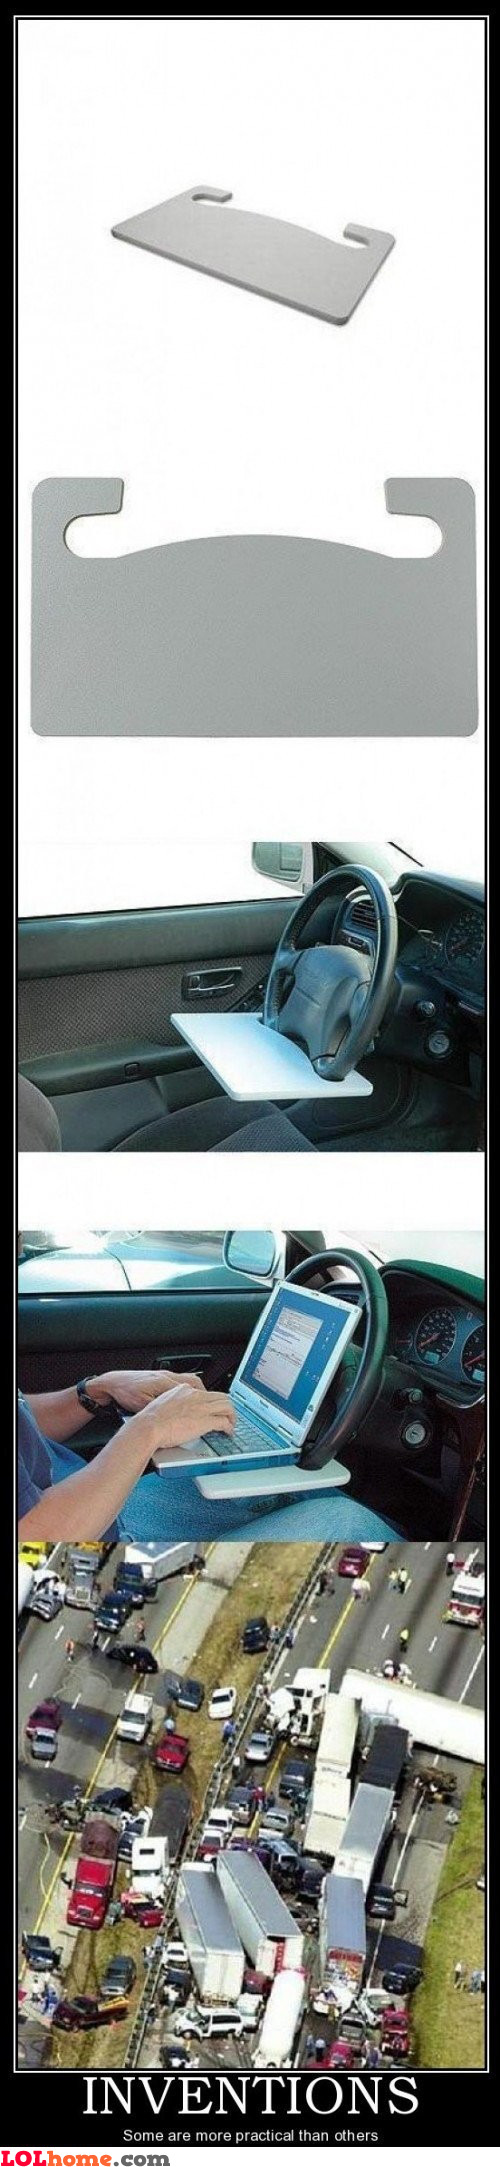 http://www.lolhome.com/img_big/practical-inventions.jpg